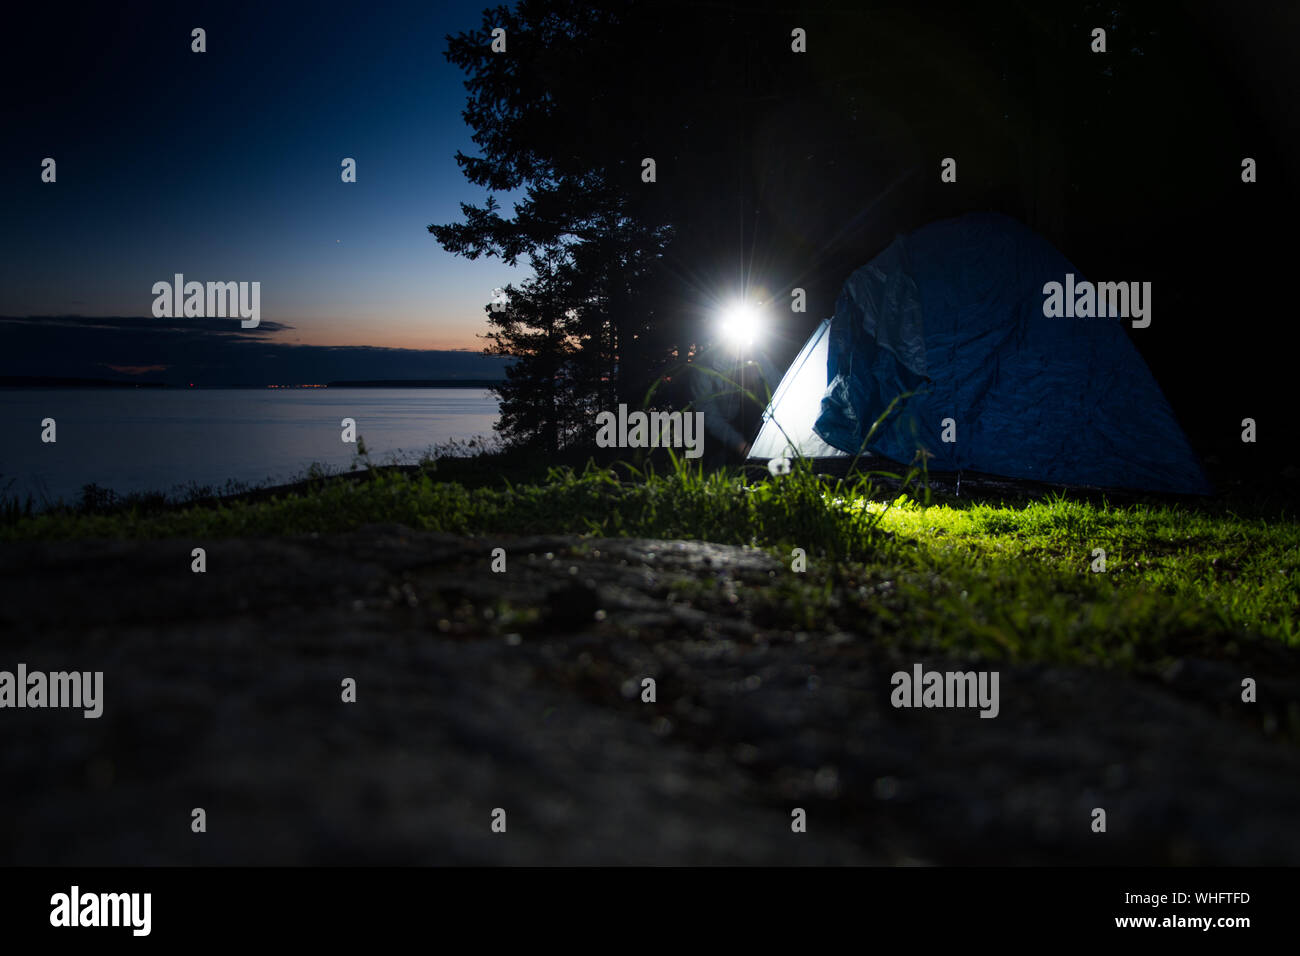 Woman Camping On Field At Night Stock Photo